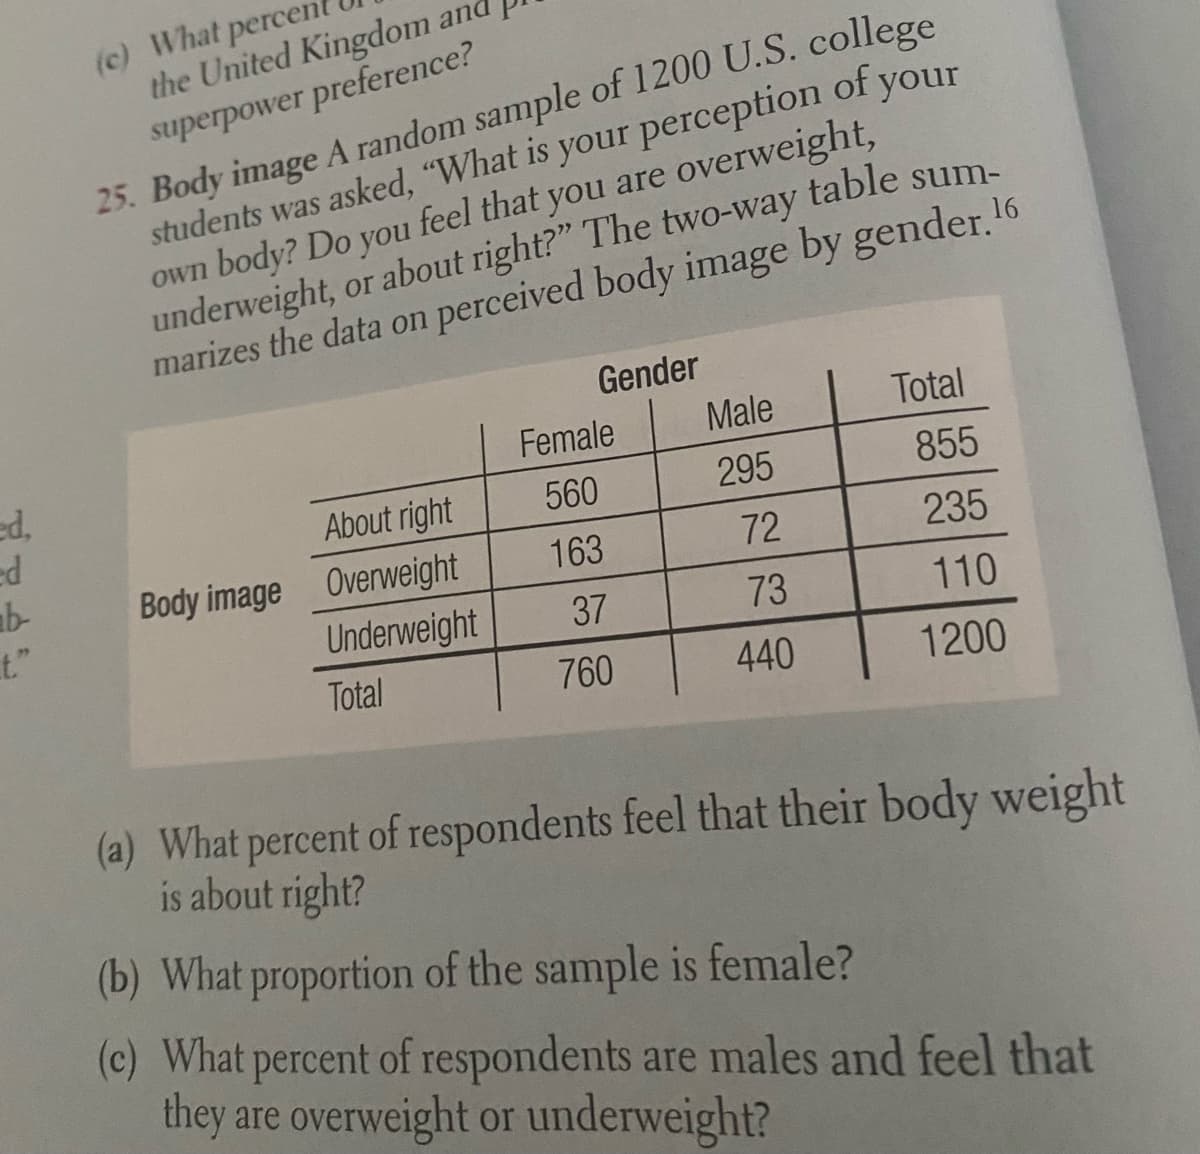 (c) What percen
the United Kingdom and
superpower preference?
25. Body image A random sample of 1200 U.S. college
students was asked, "What is your perception of your
own body? Do you feel that you are overweight,
underweight, or about right?" The two-way table sum-
marizes the data on perceived body image by gender. 16
Gender
Female
Male
Total
ed,
295
855
About right
560
163
72
235
ab-
t."
Body image Overweight
Underweight
37
73
110
Total
760
440
1200
(a) What percent of respondents feel that their body weight
is about right?
(b) What proportion of the sample is female?
(c) What percent of respondents are males and feel that
they are overweight or underweight?
